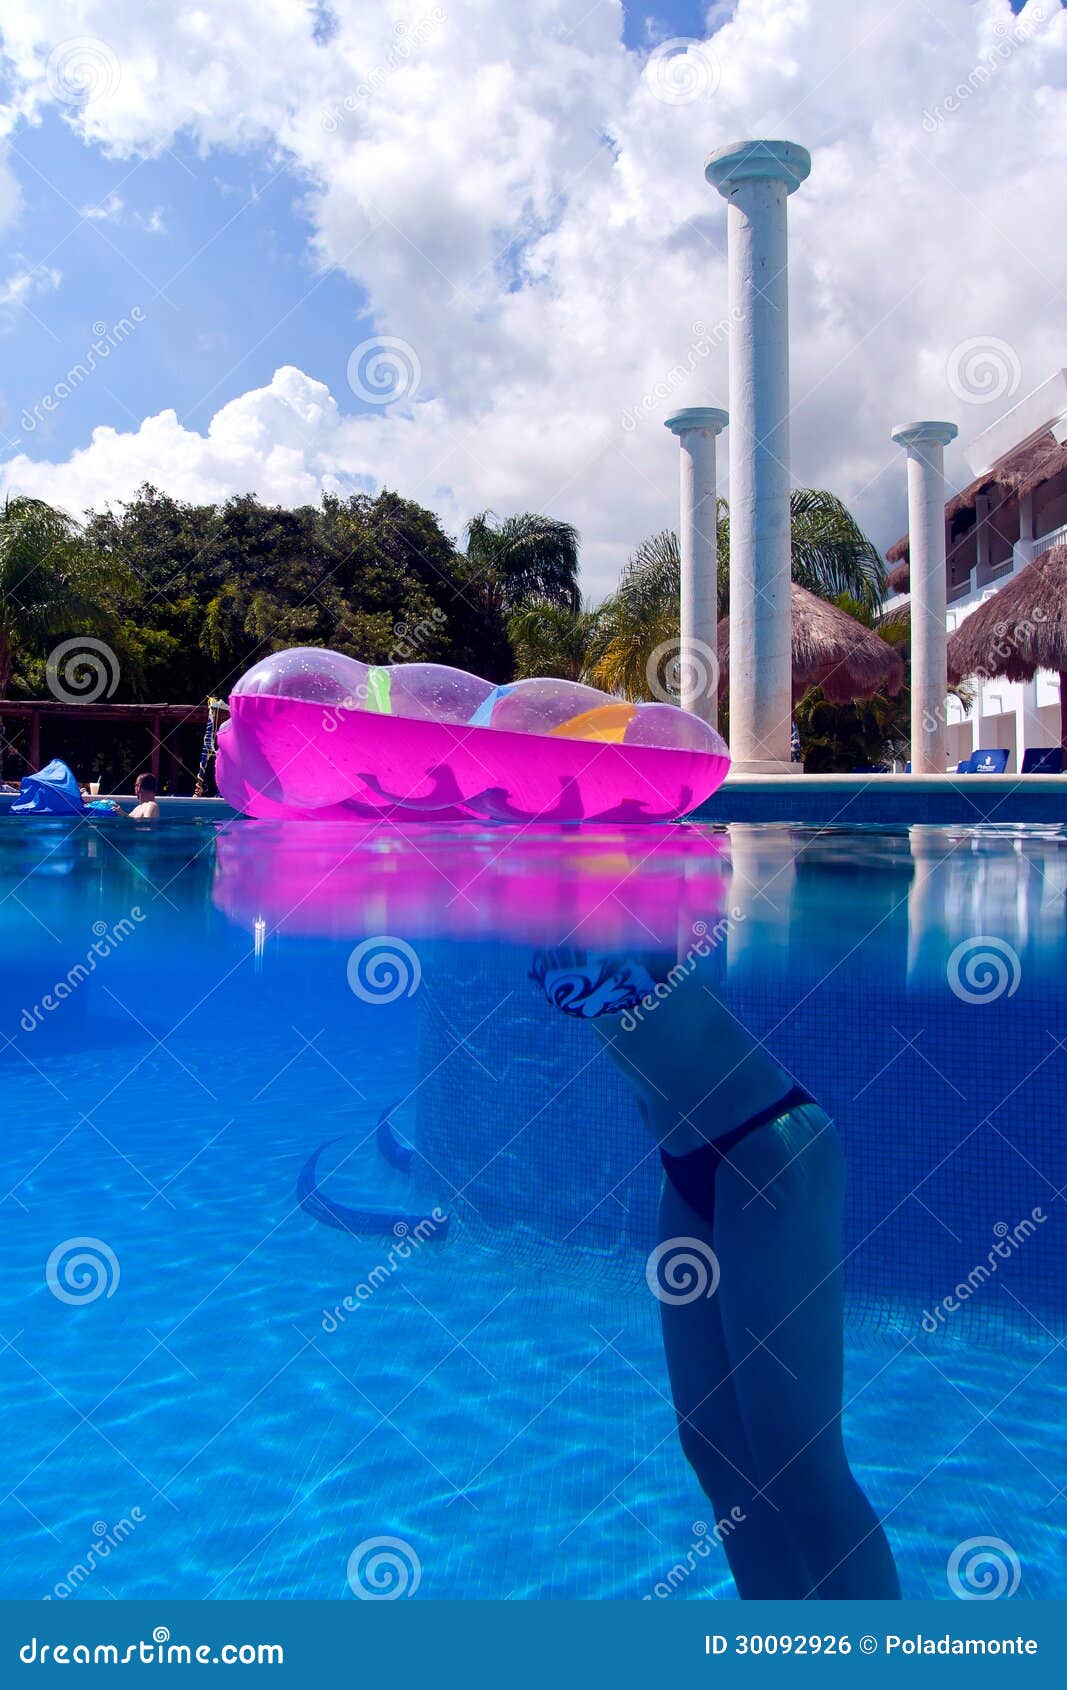 a girl in a swimming pool at playa del carmen, mexico